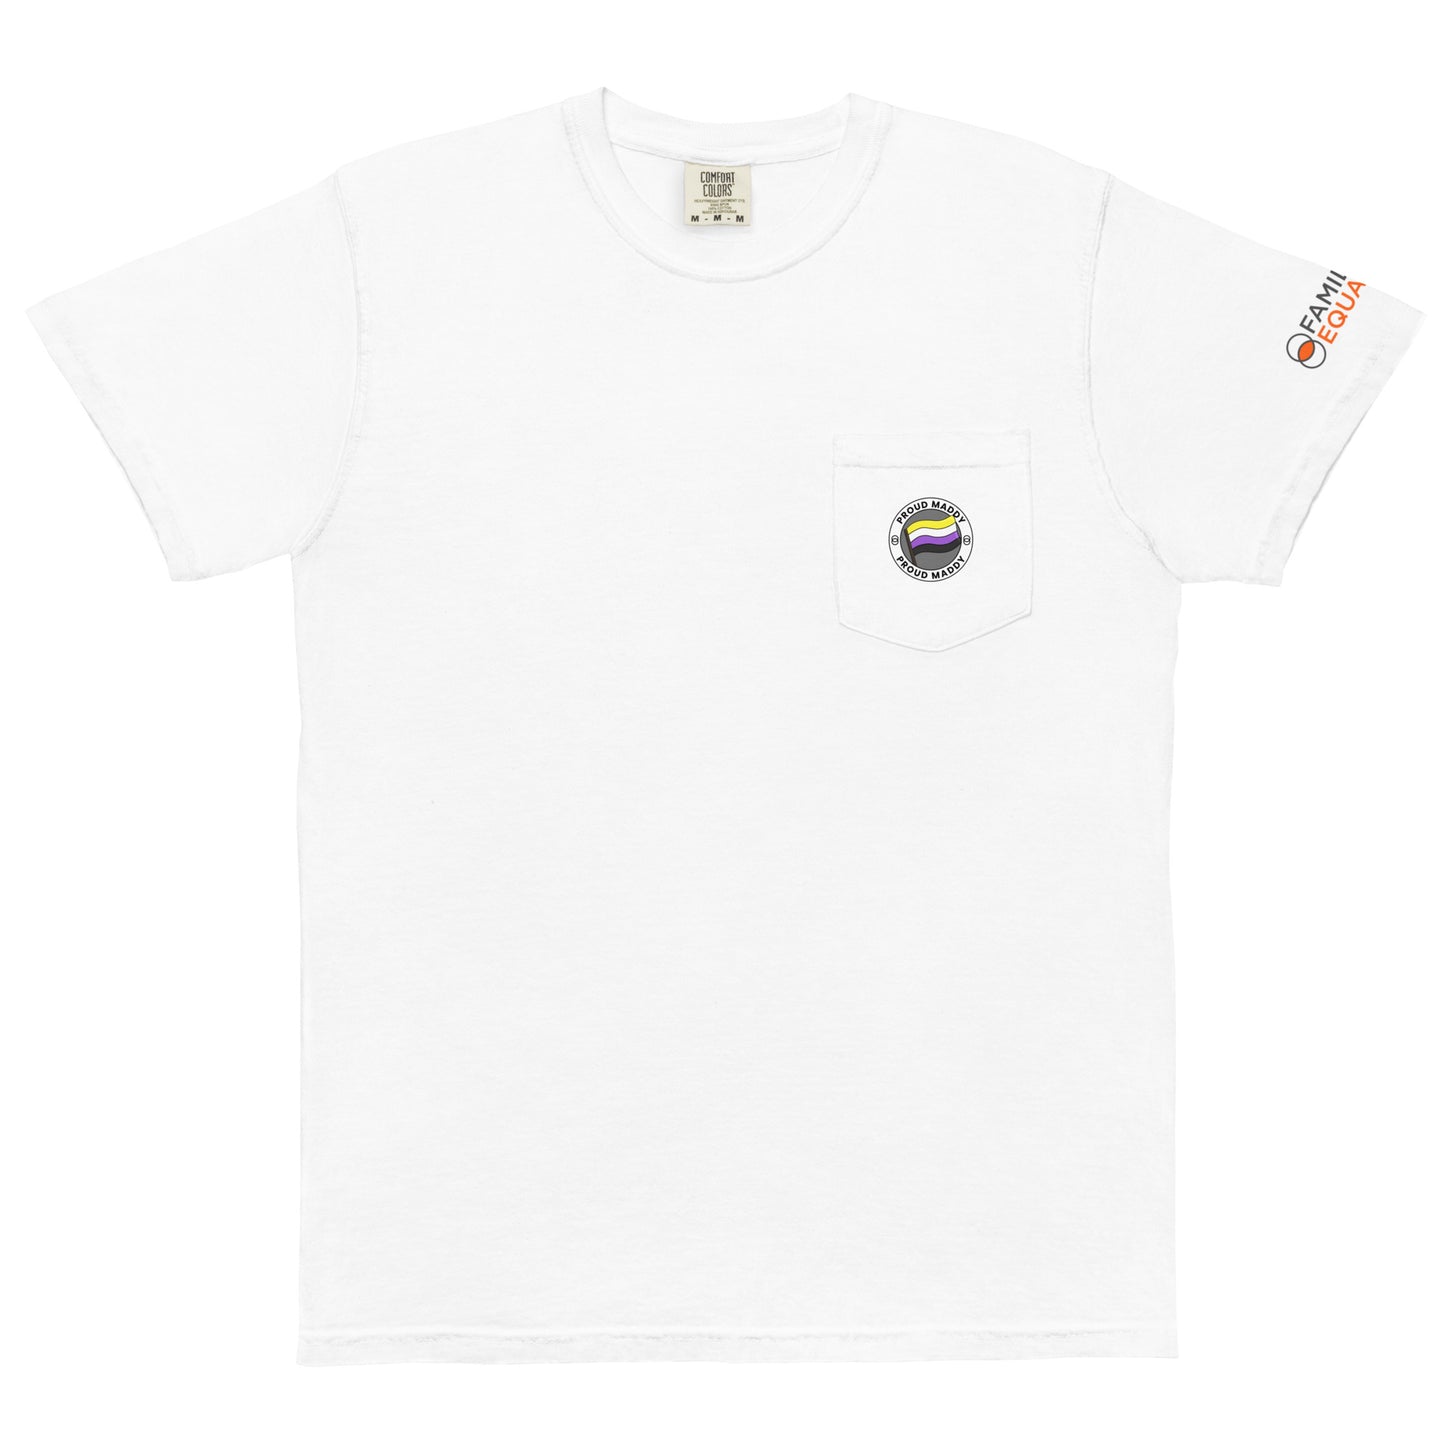 Proud Maddy | Unisex garment-dyed pocket t-shirt in white